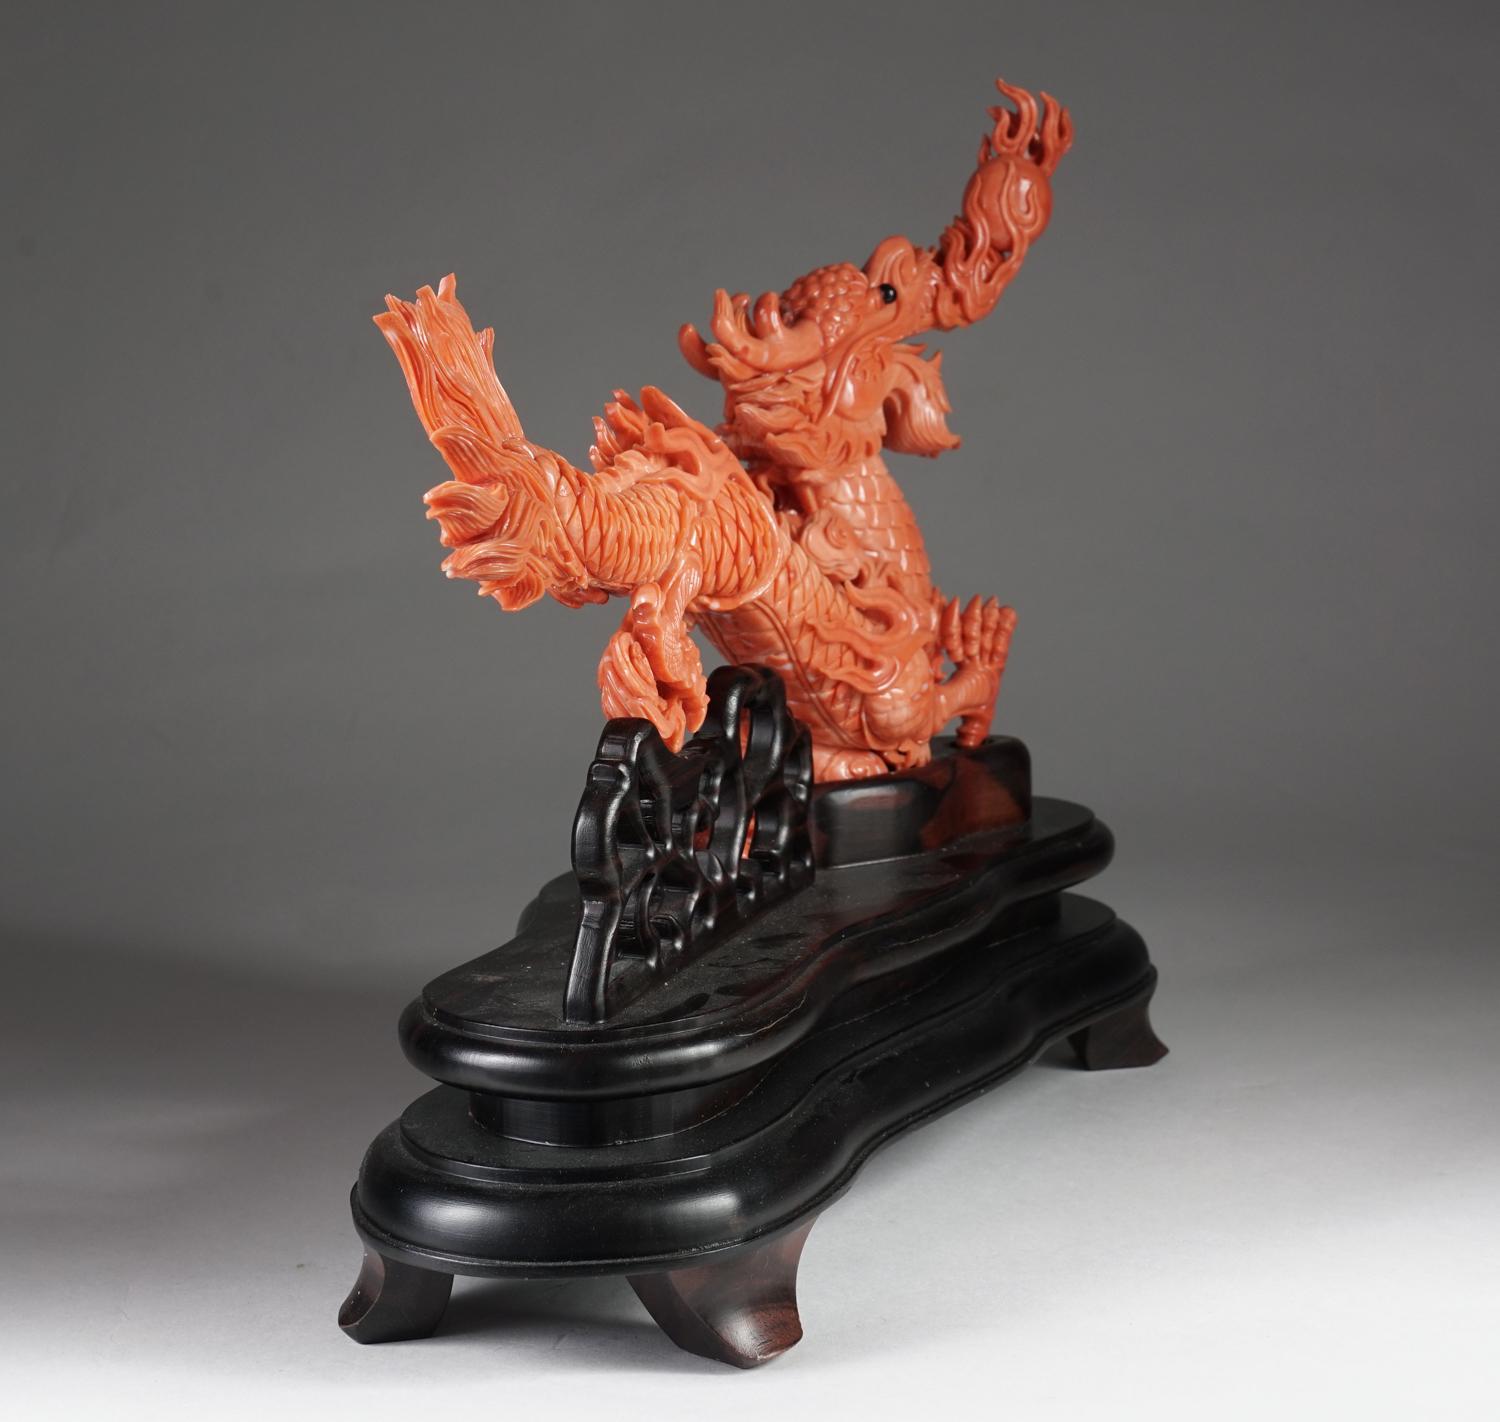 19th Century Exceptional Chinese Carved Coral Dragon with Fire, Qing Dynasty